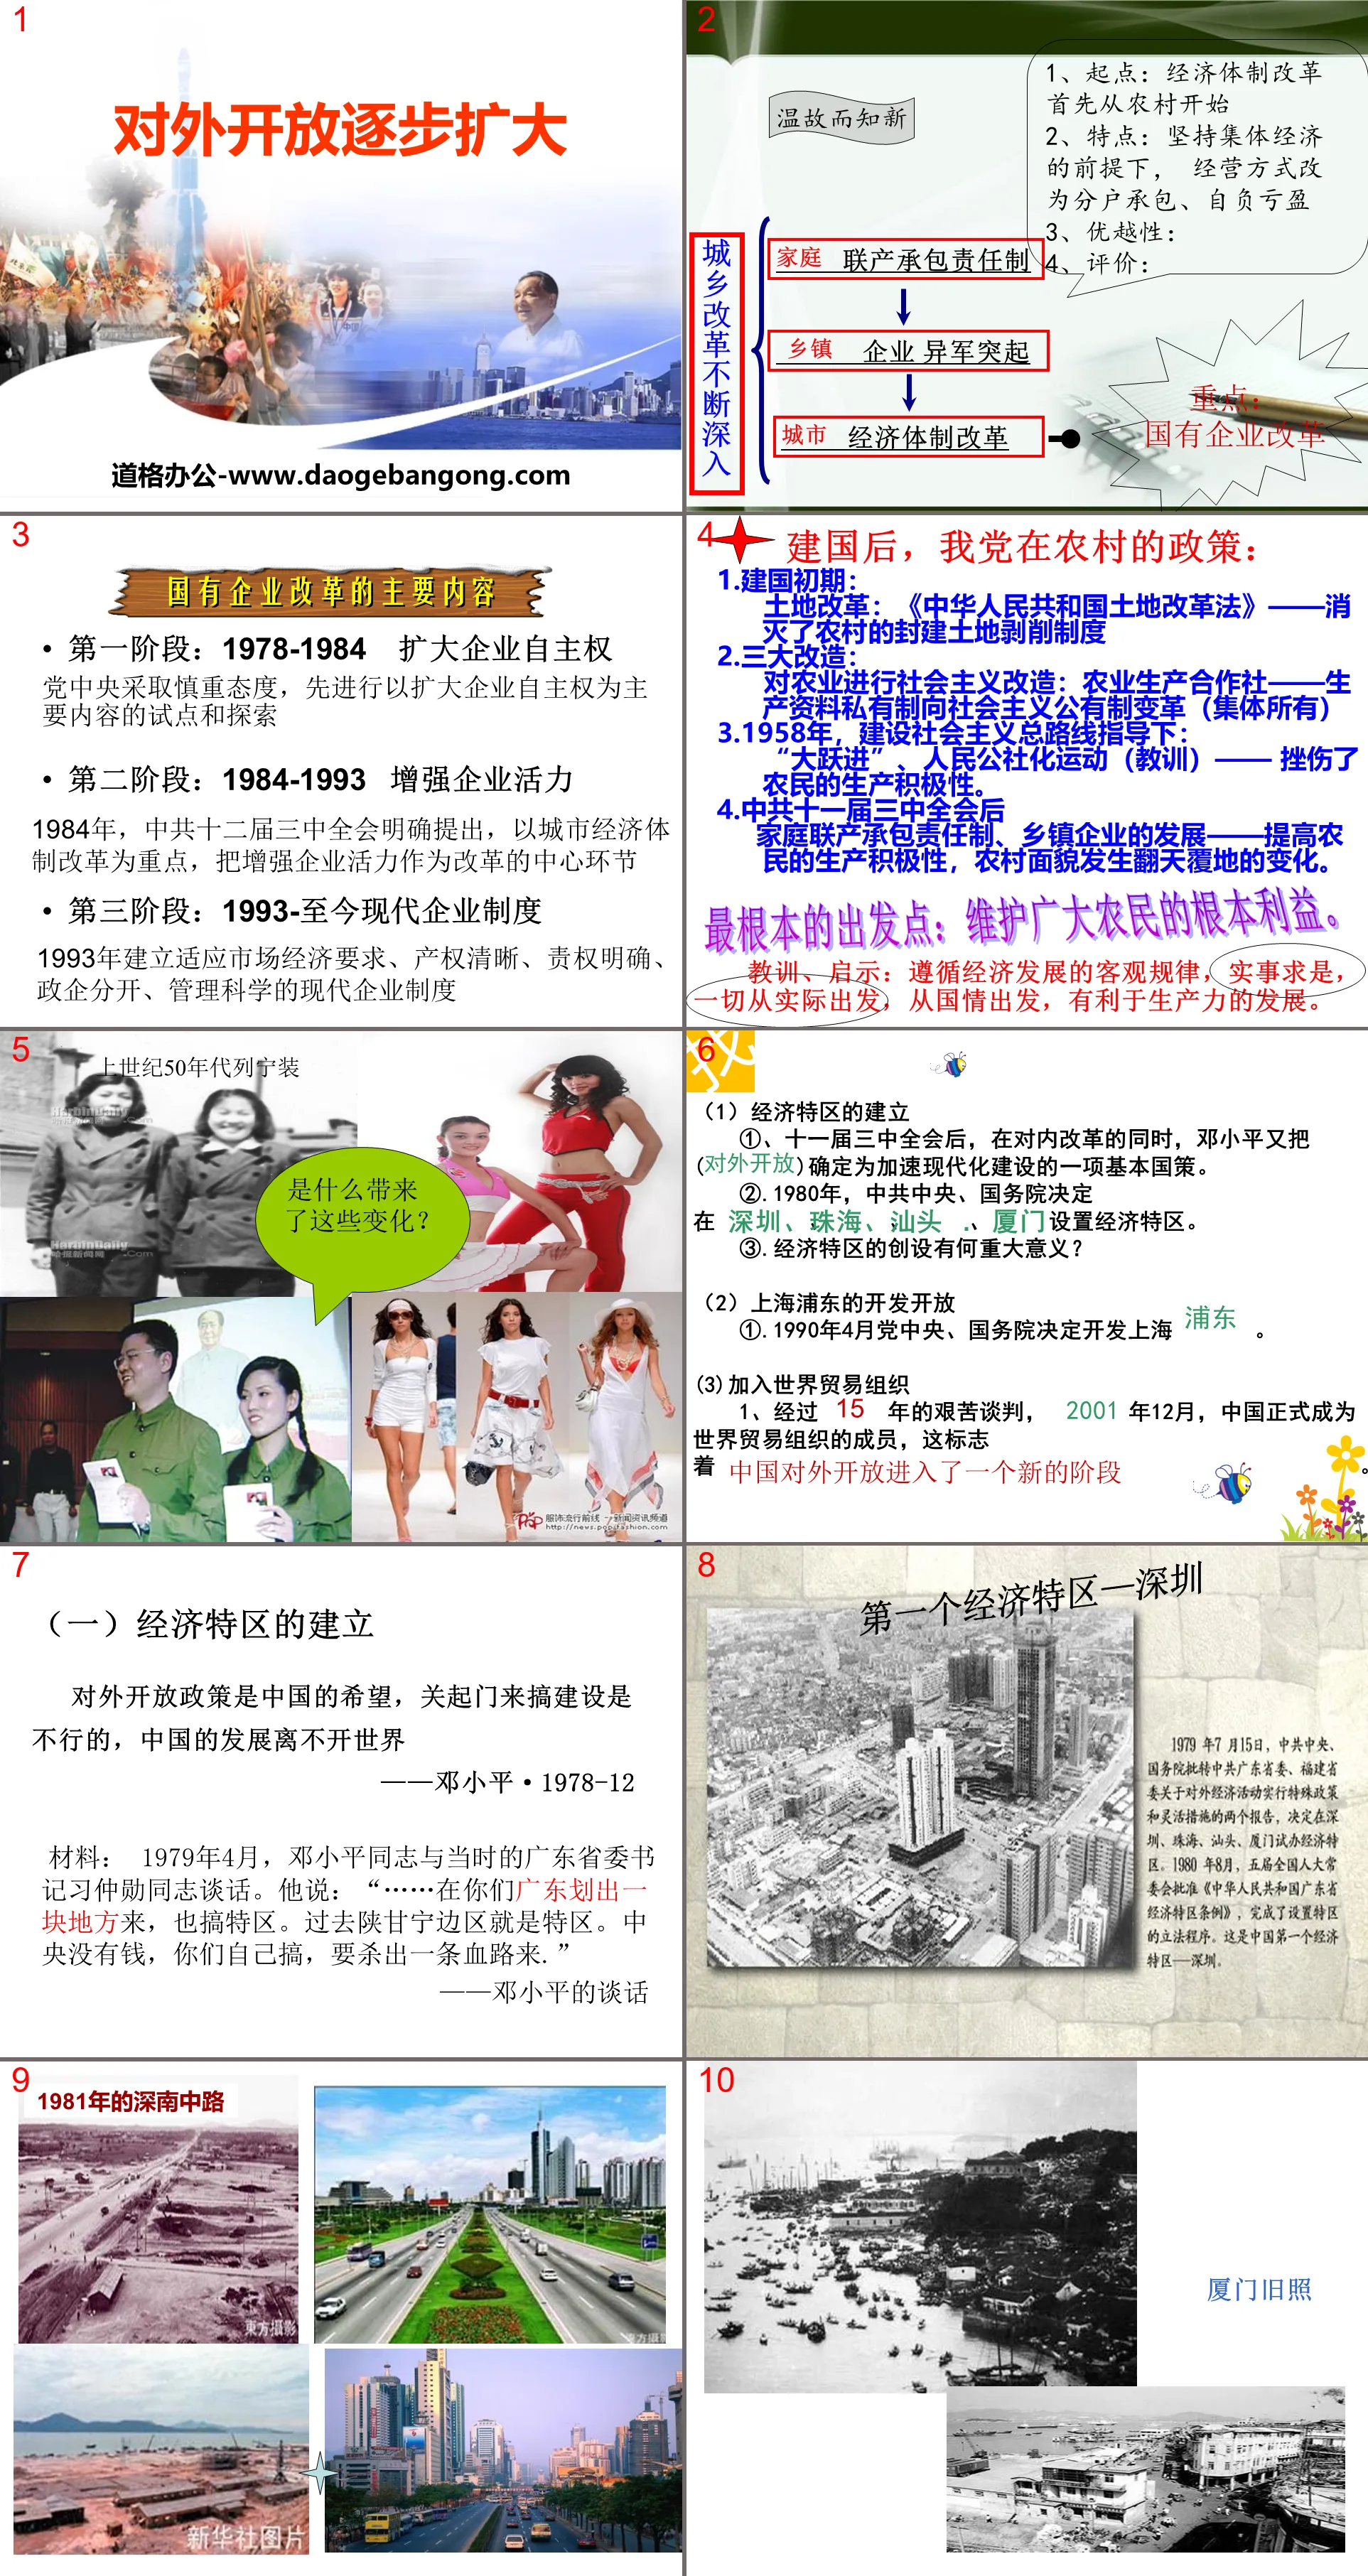 "Gradually Expanding Opening to the Outside World" PPT courseware on building socialism with Chinese characteristics